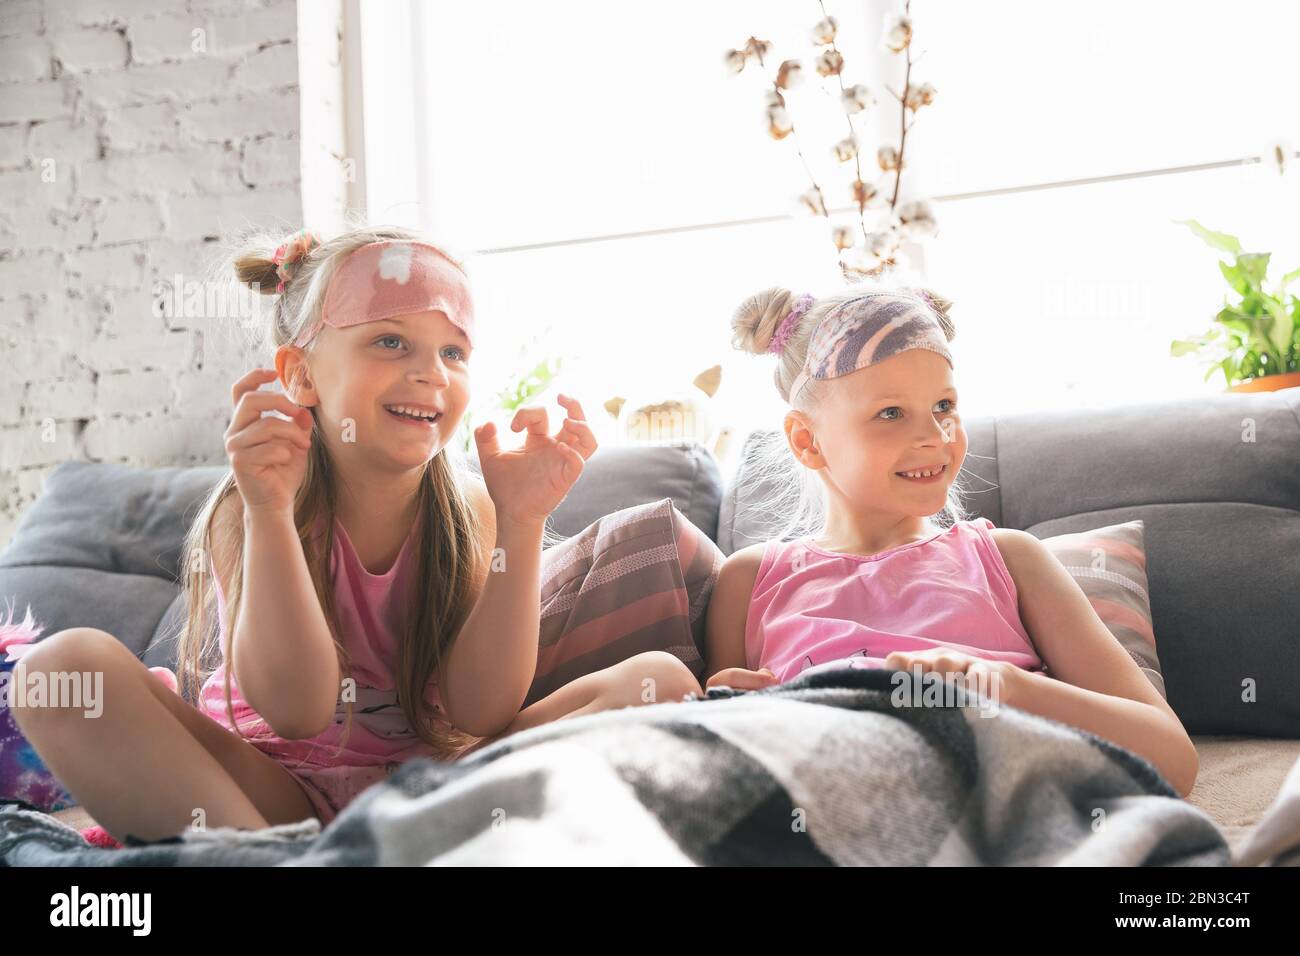 Quiet Little Girls Waking Up In A Bedroom In Cute Pajamas Home Style And Comfort Cute Caucasian Girls In Early Morning Sweet Dreams Concept Of Childhood Happiness Friendship Pajamas Party Stock Photo